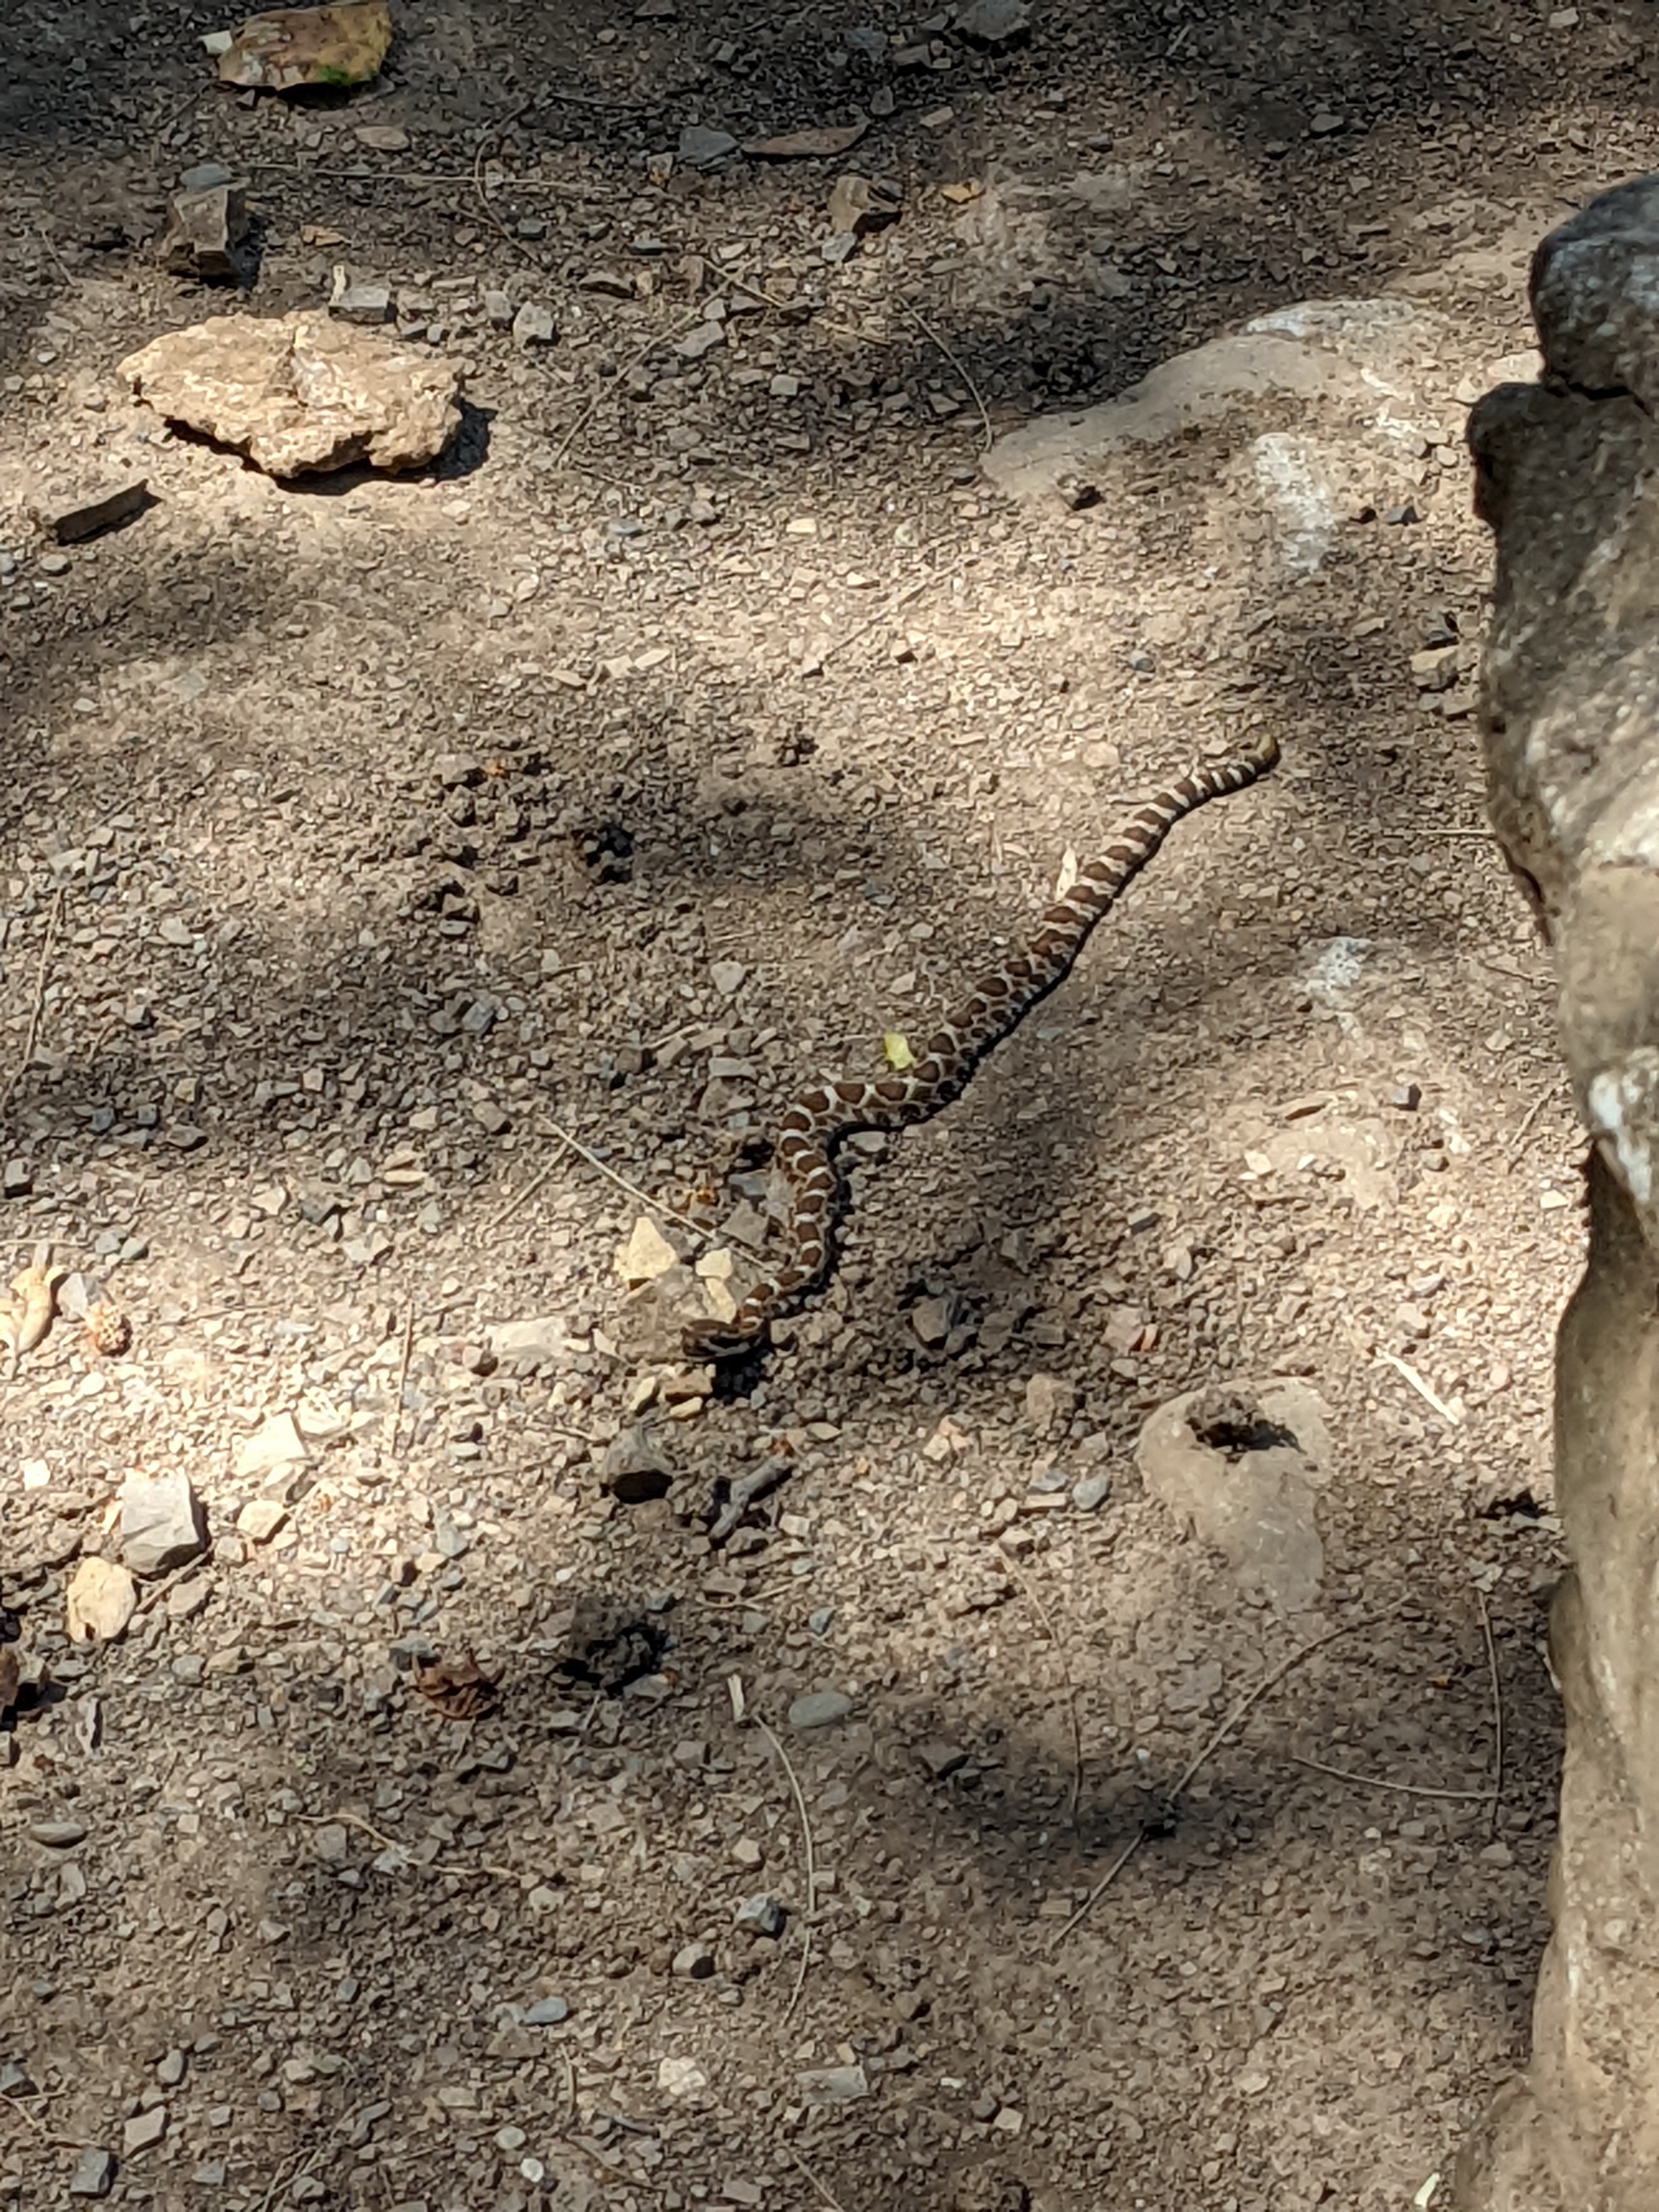 Baby rattlesnake on a hiking trail